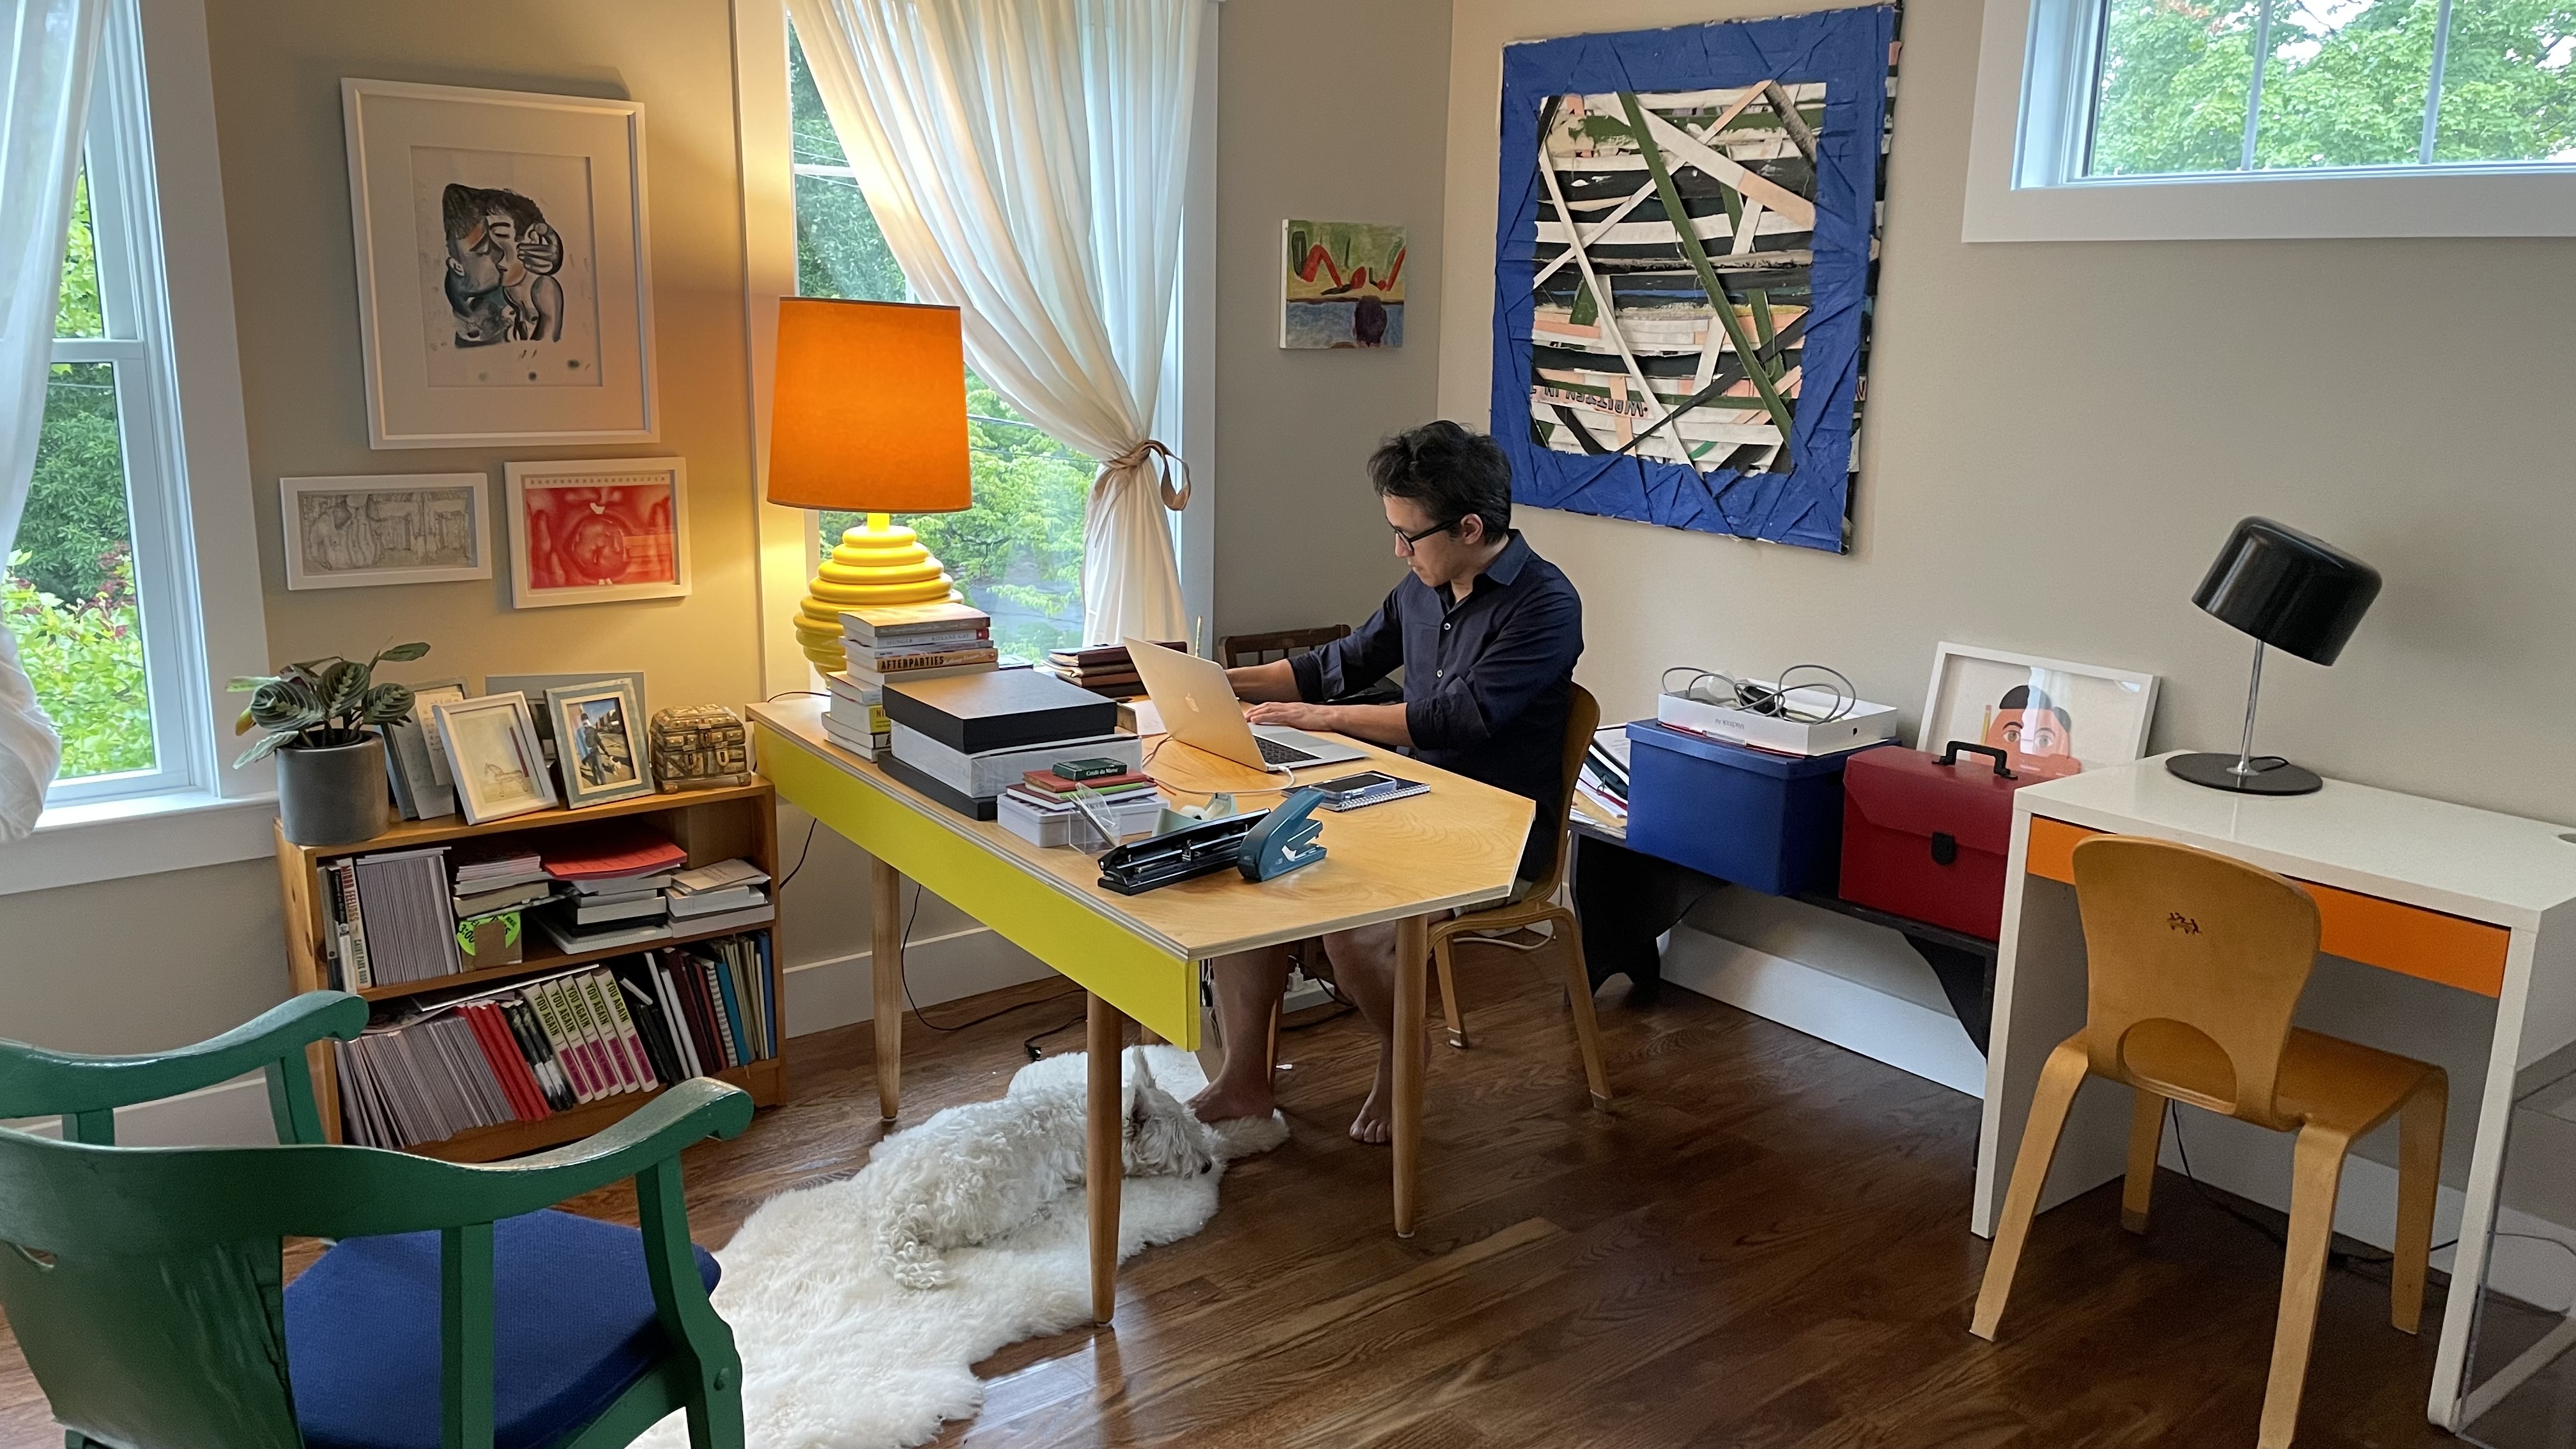 Quang Bao in his home office with work by Pau Atela and Matt Chambers behind him